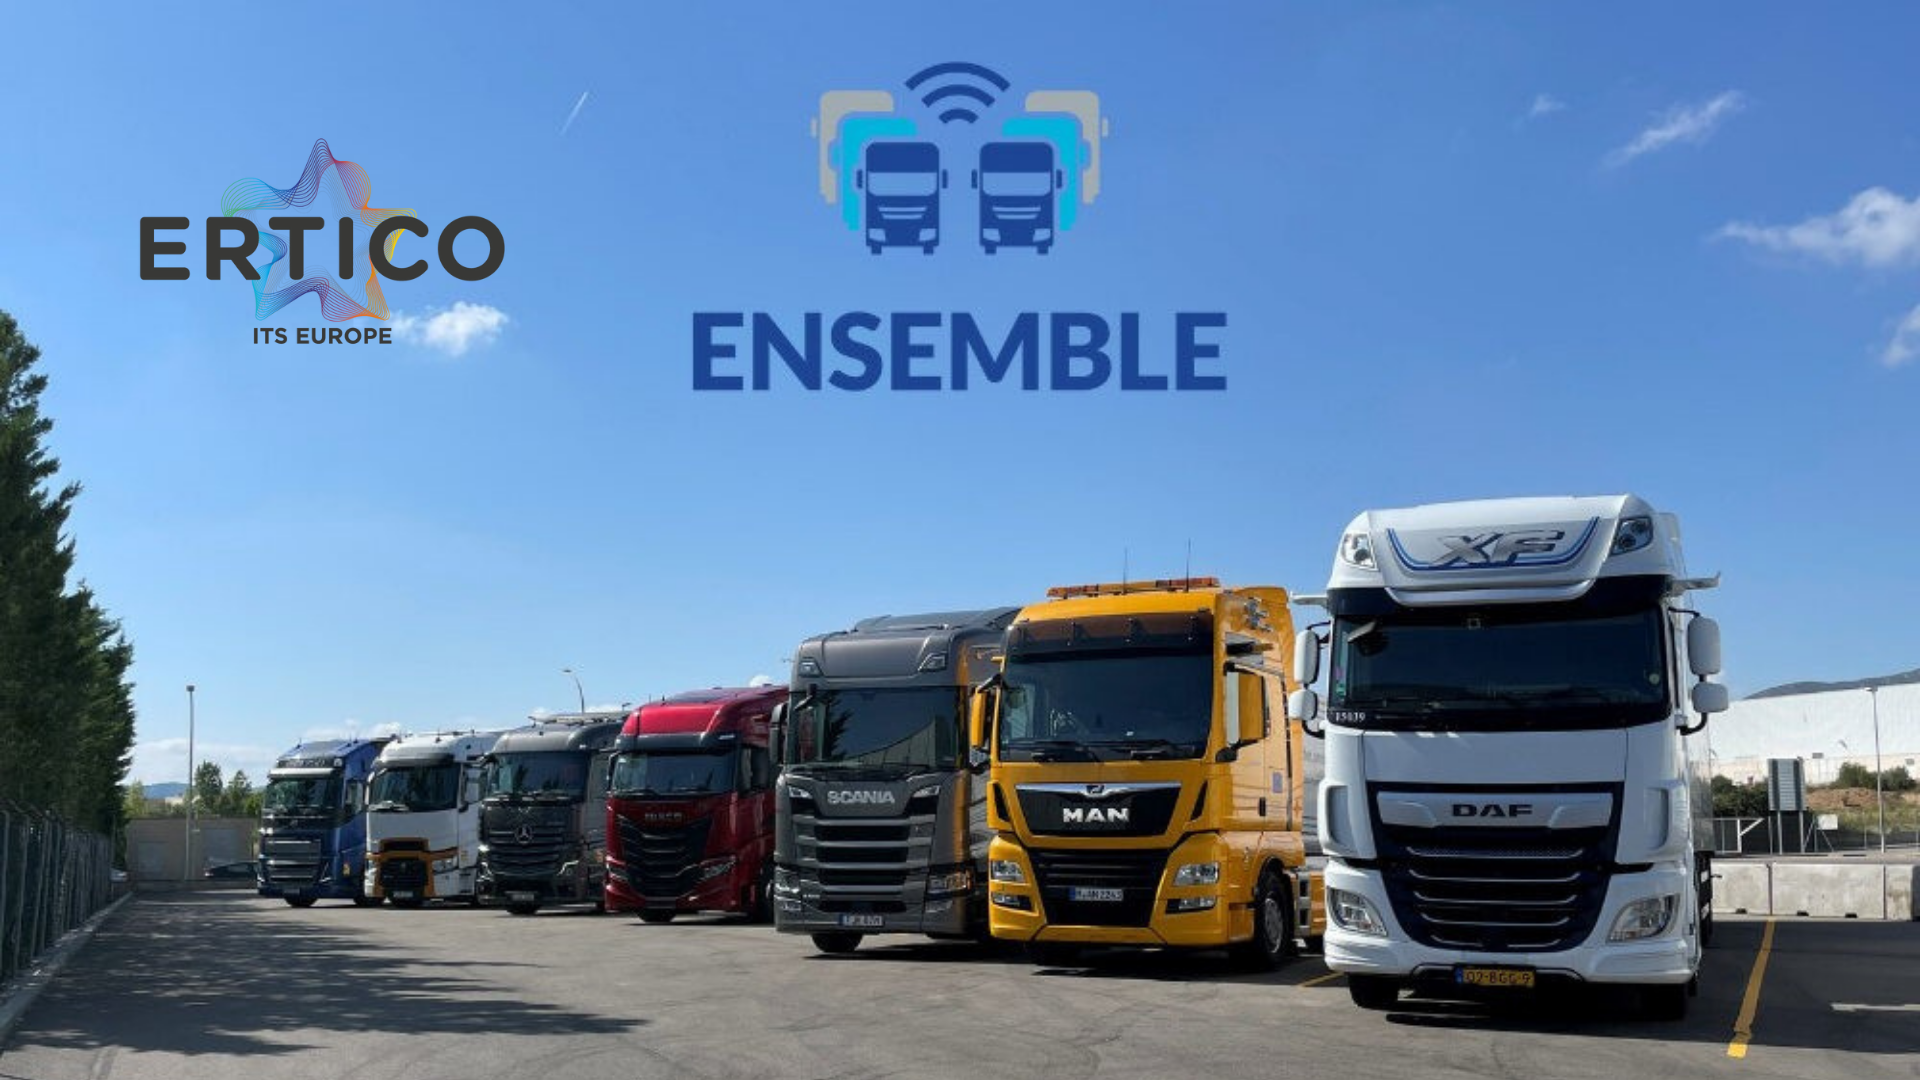 ENSEMBLE project: the new frontier of multi-brand truck platooning